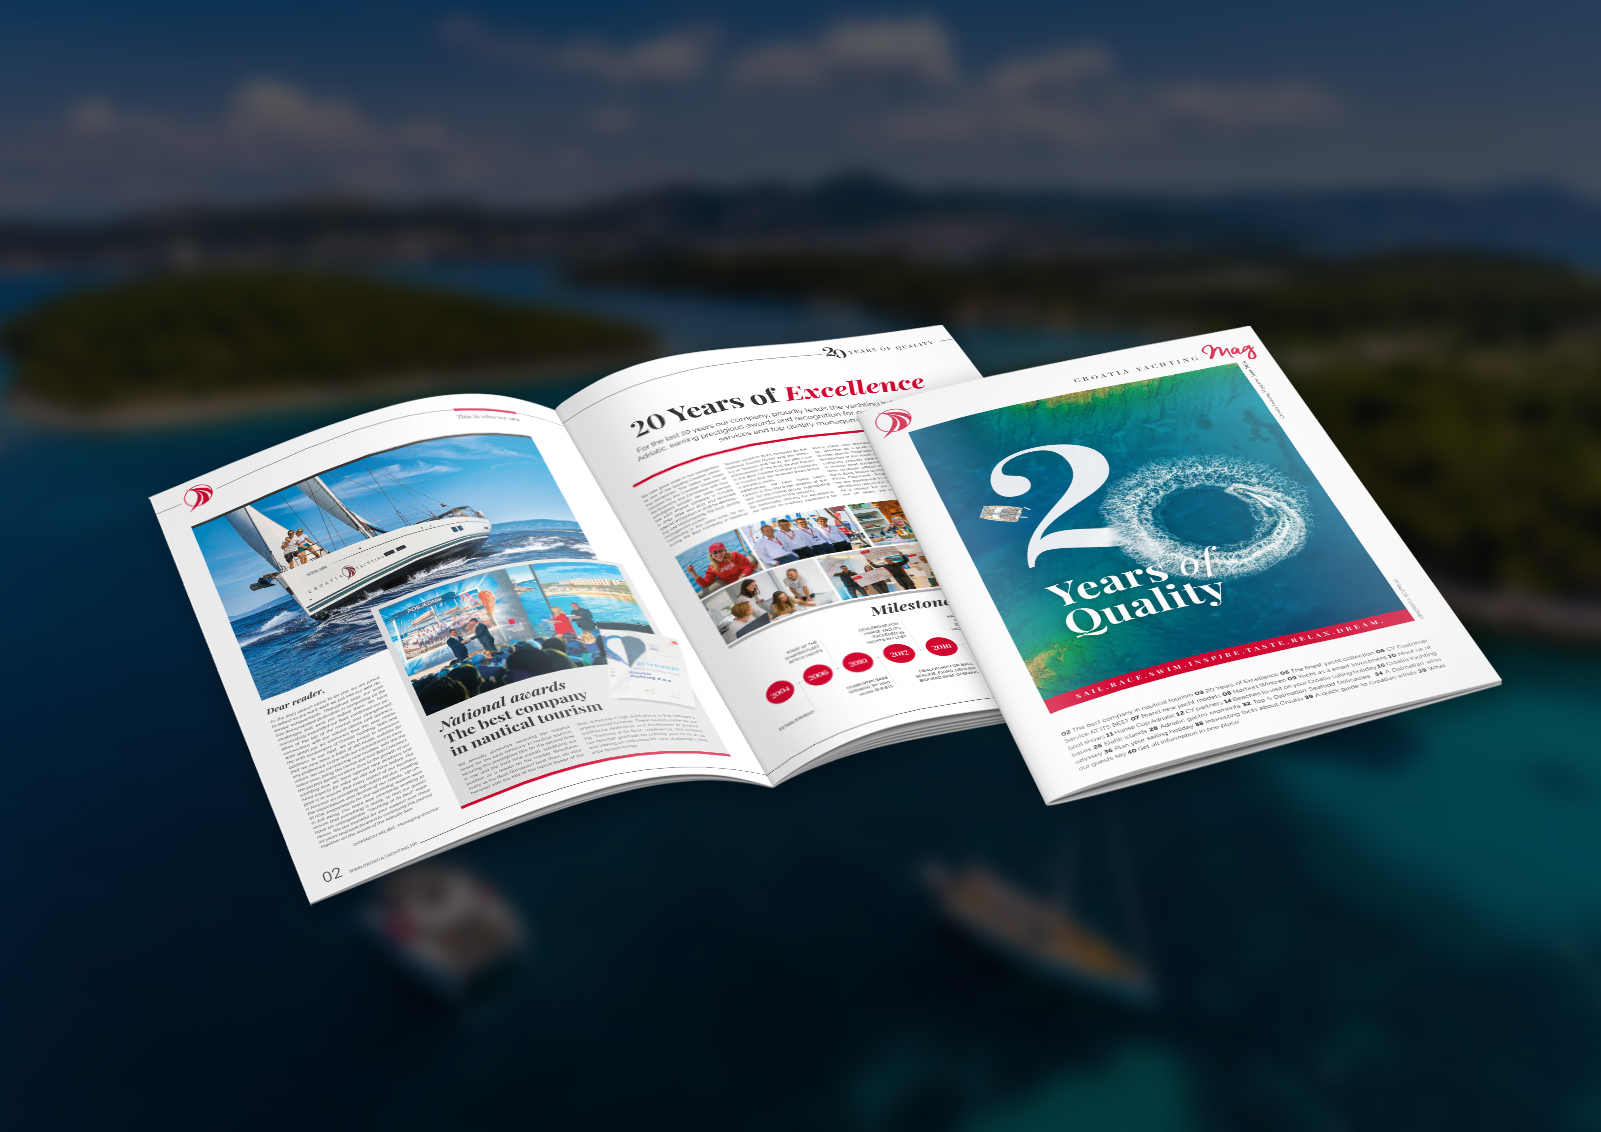 Introducing Our Latest Edition of Croatia Yachting Magazine